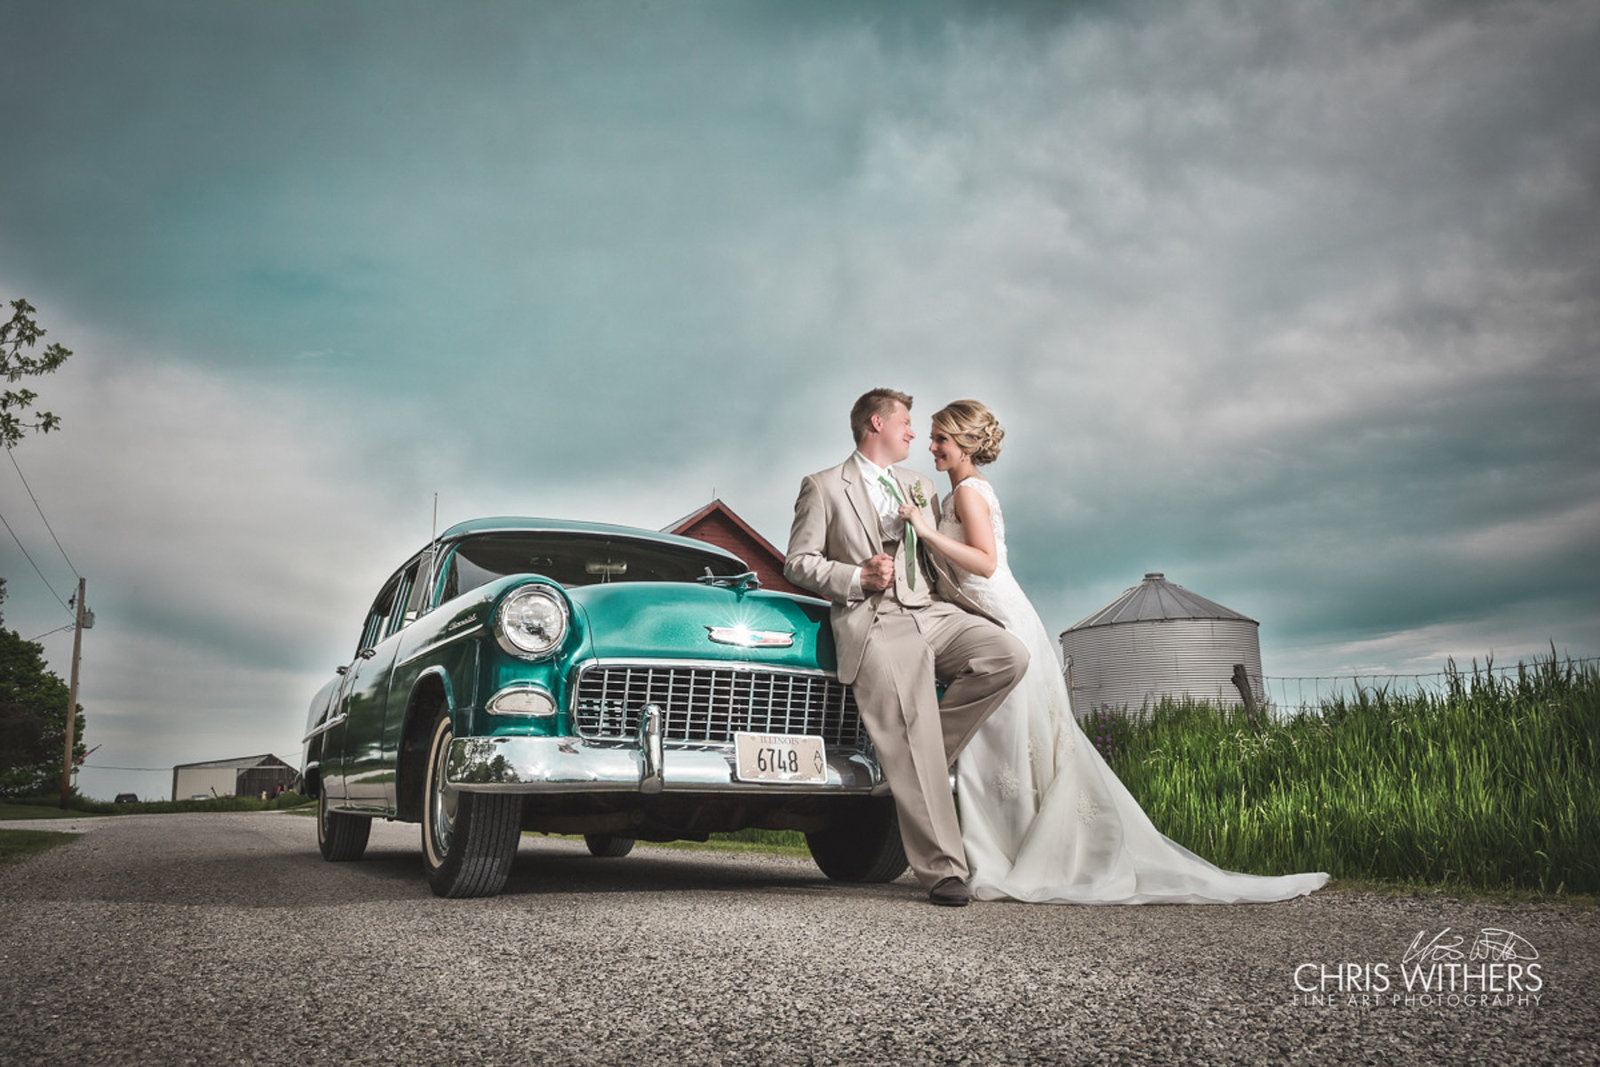 Springfield Illinois Wedding Photographer - Chris Withers Photography (27 of 159)